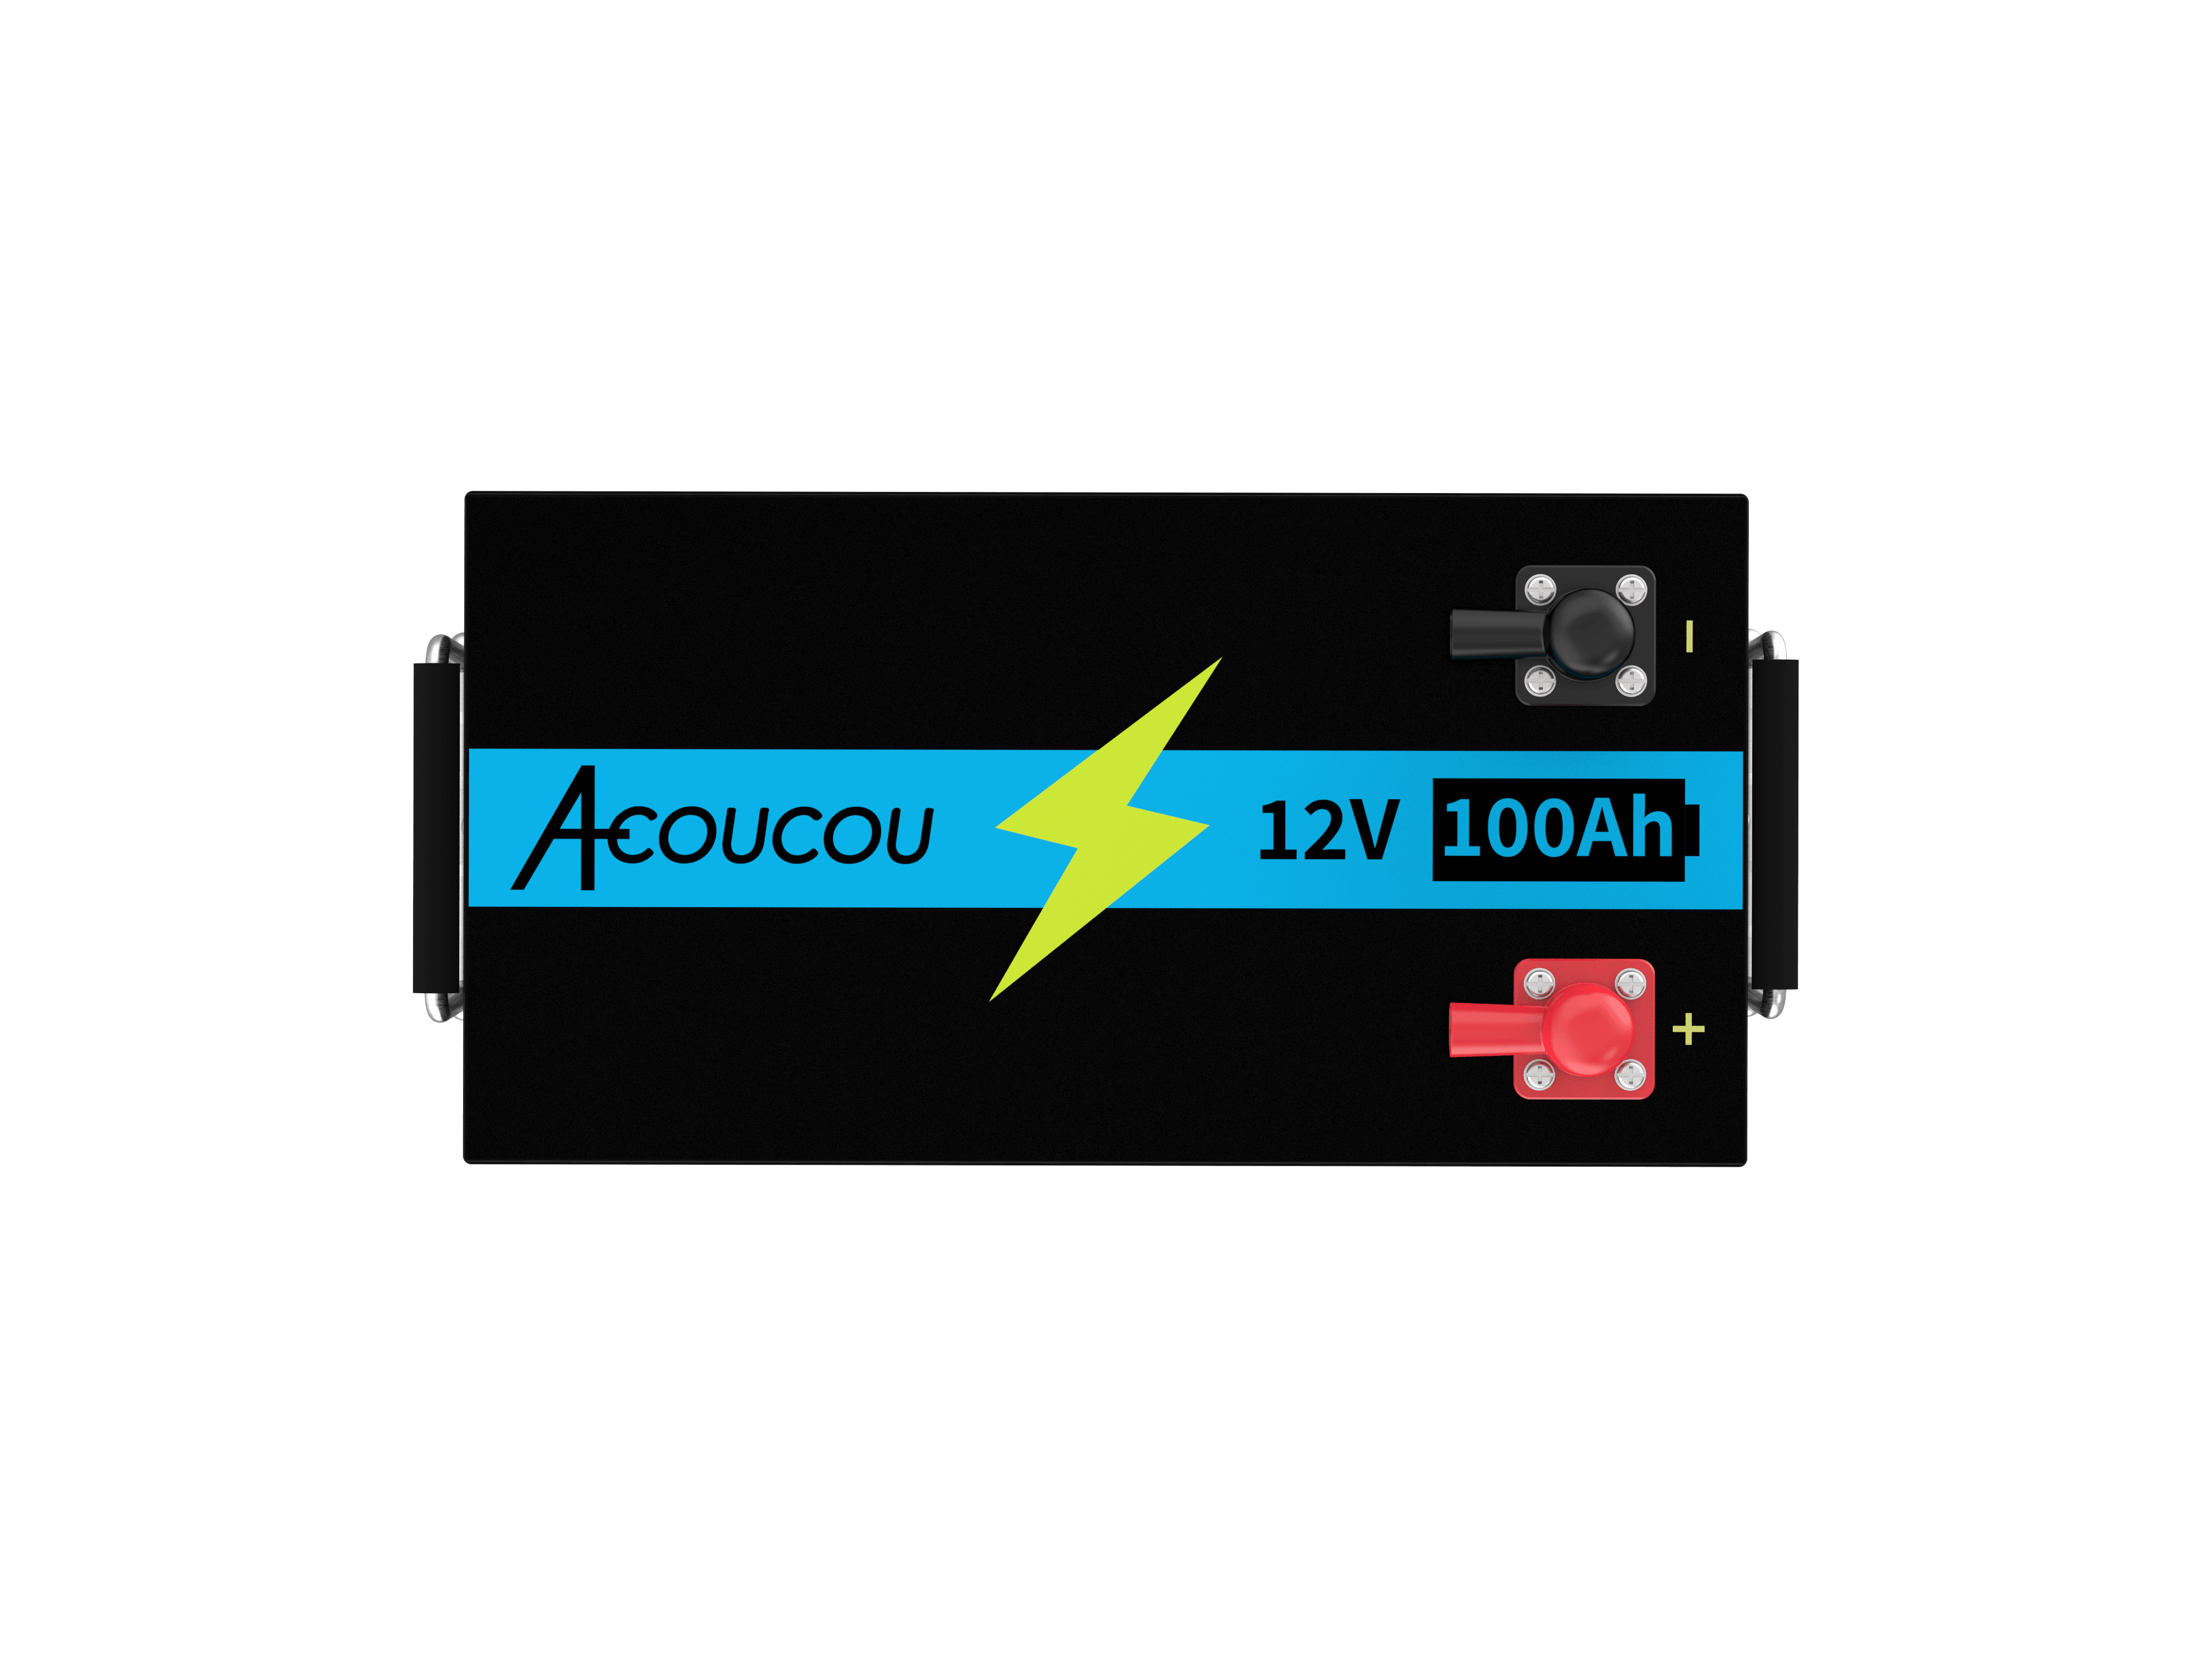 Acoucou MaxOne 12V 100Ah Bluetooth Lithium LiFePO4 Deep Cycle Battery,RV Marine Motor Golfcart Battery - Acoucoubatteries